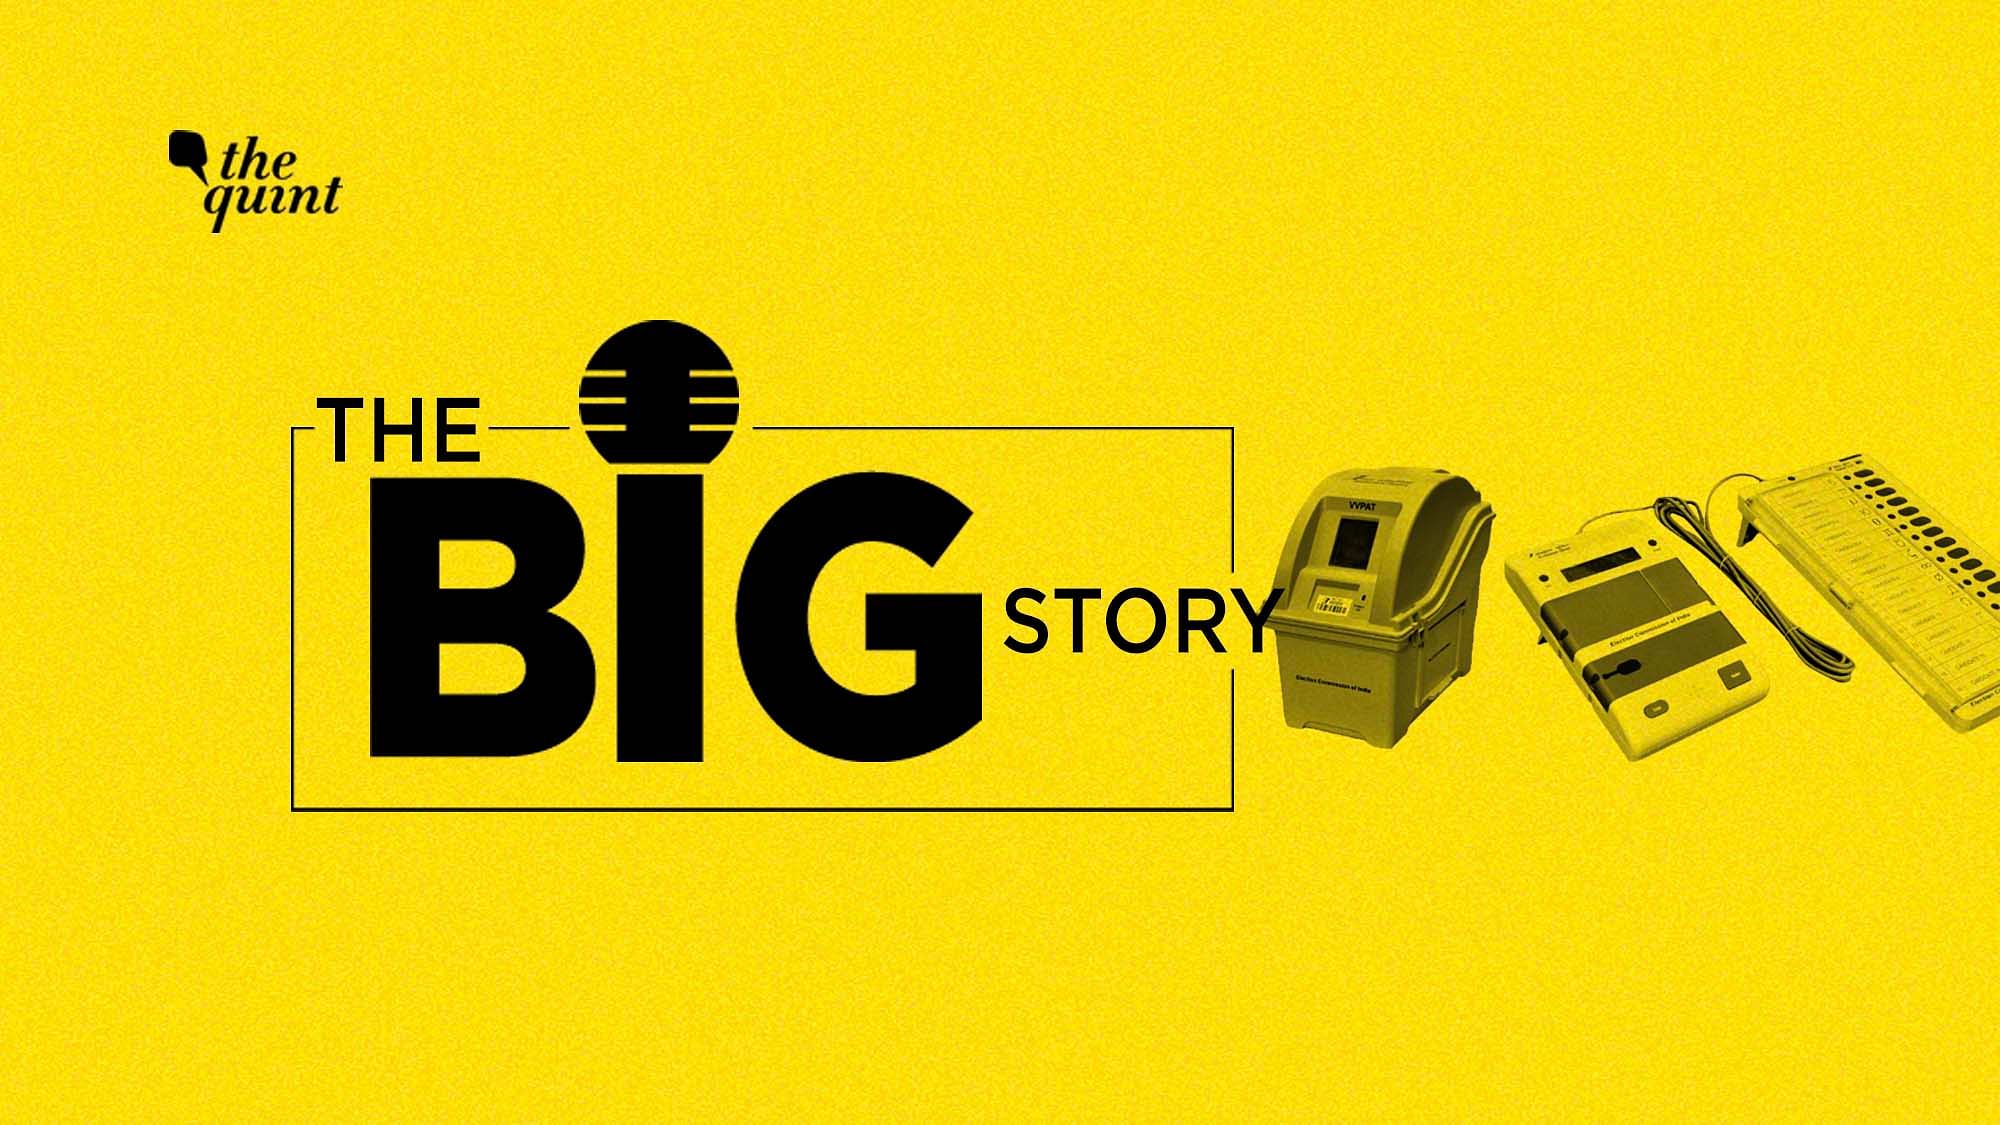 On this episode of The Big Story, we look into how VVPATs, which were introduced to ensure voters that their votes have been correctly registered in EVMs, can be manipulated to give specific results.